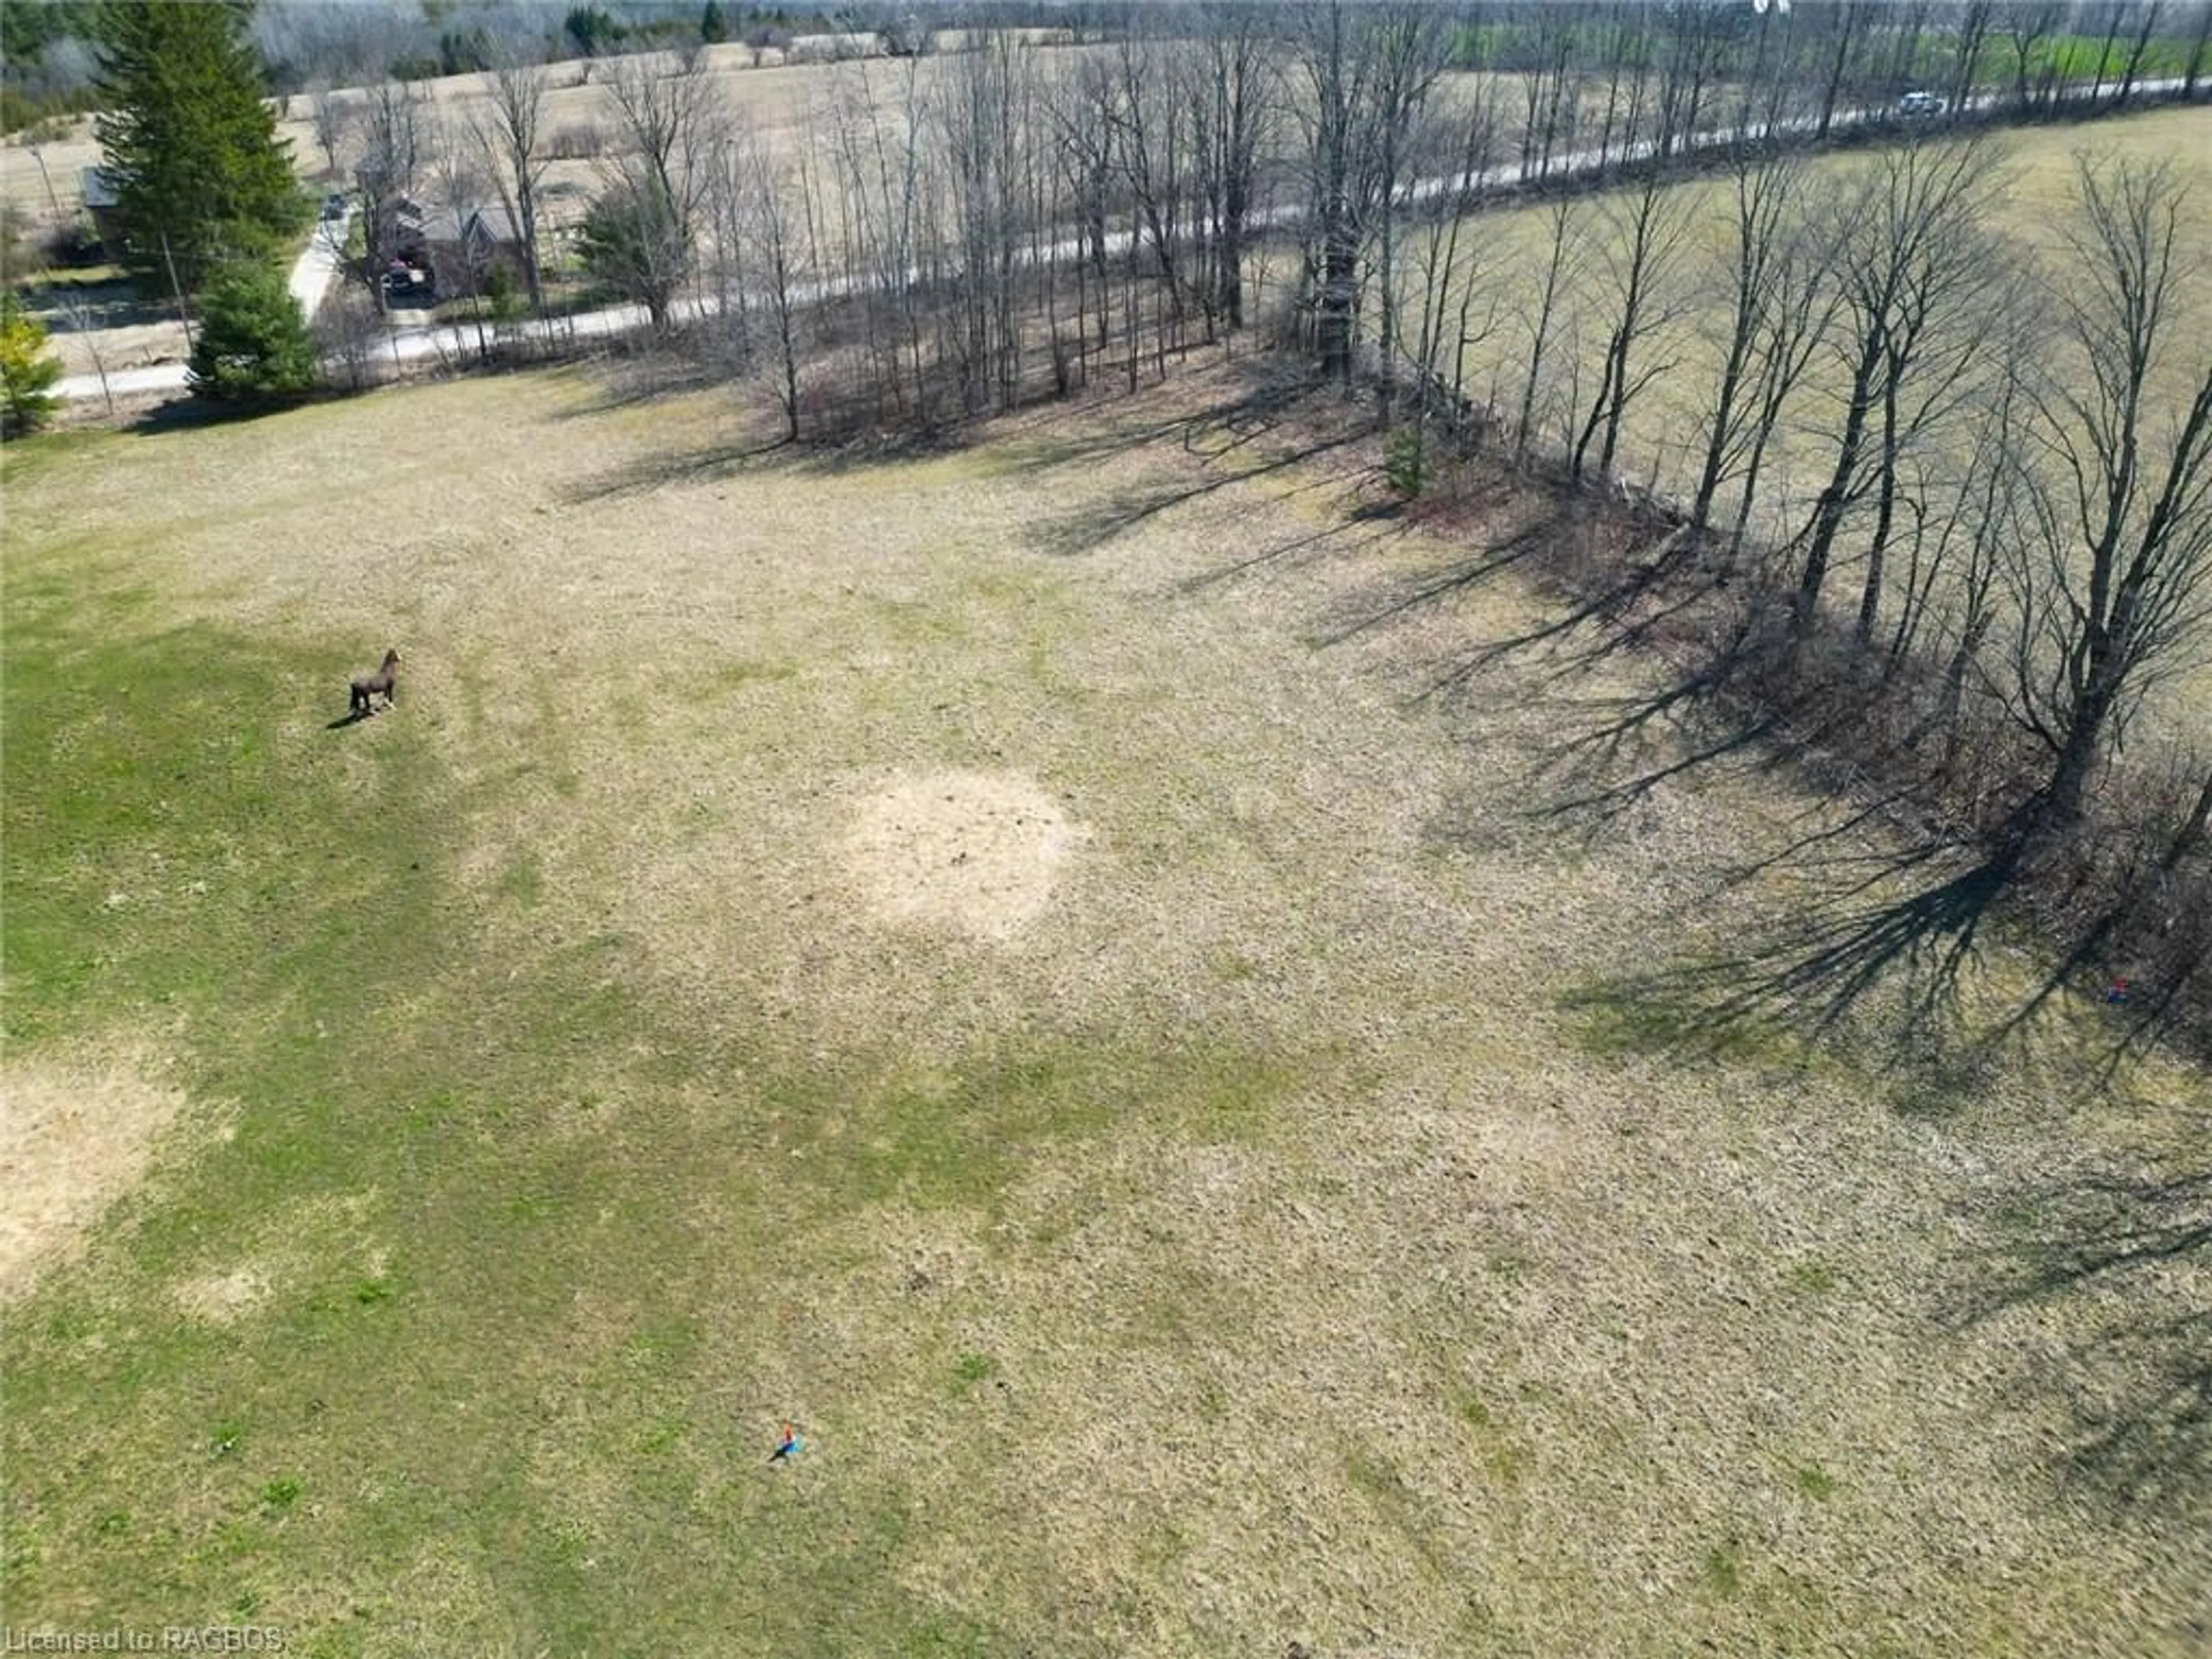 Fenced yard for PT LT 4 Concession 6, Chatsworth Ontario N0H 1G0